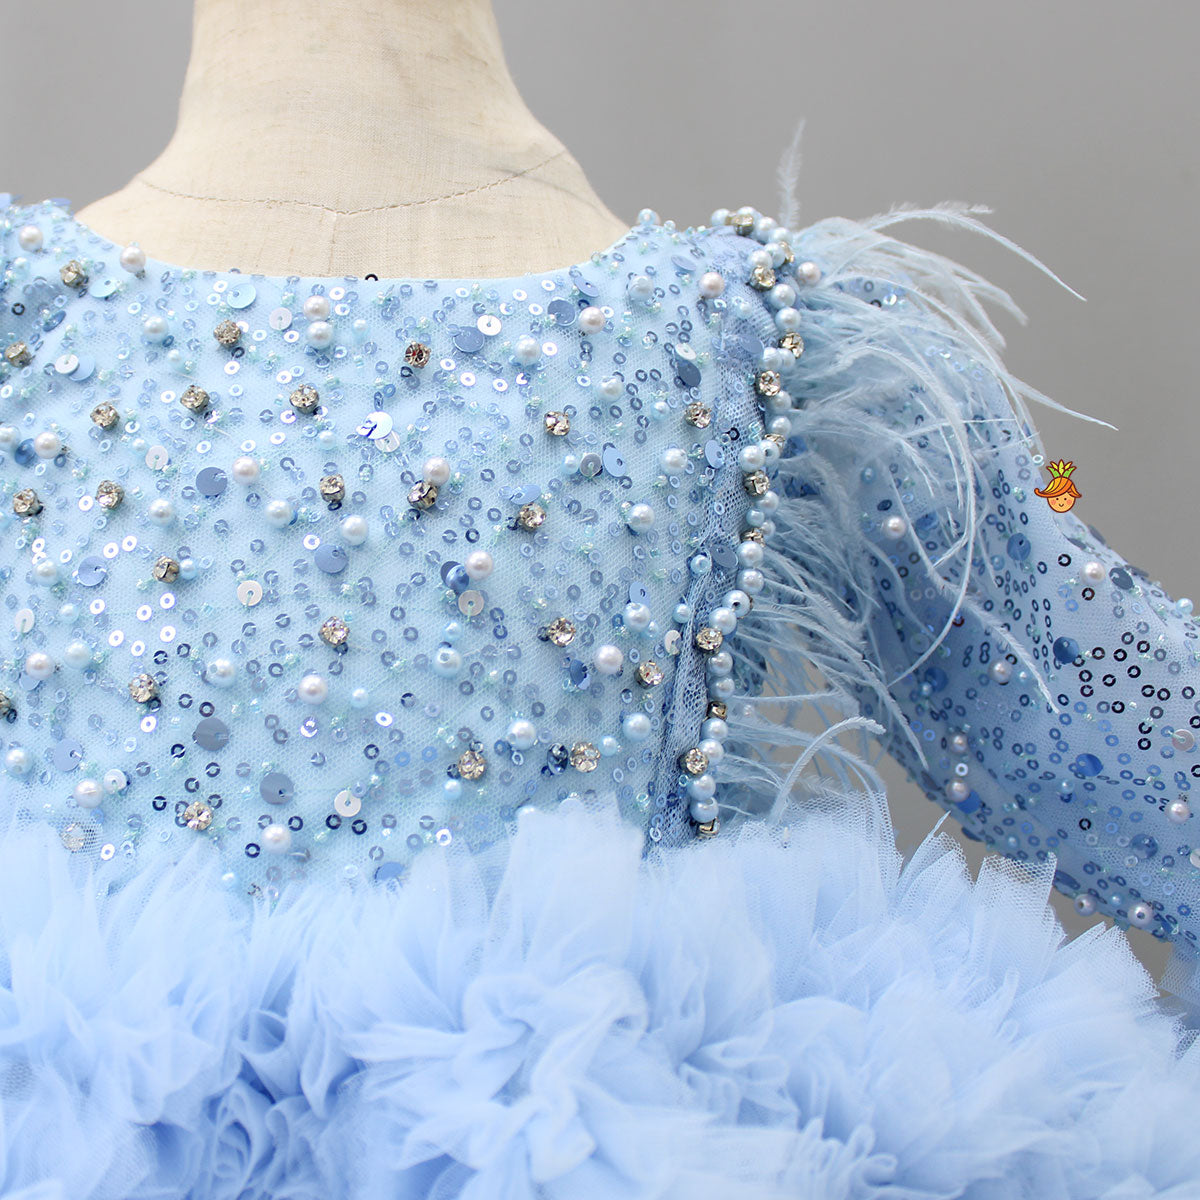 Sequins Embellished Ruffled Blue Dress With Matching Swirled Bowie Head Band